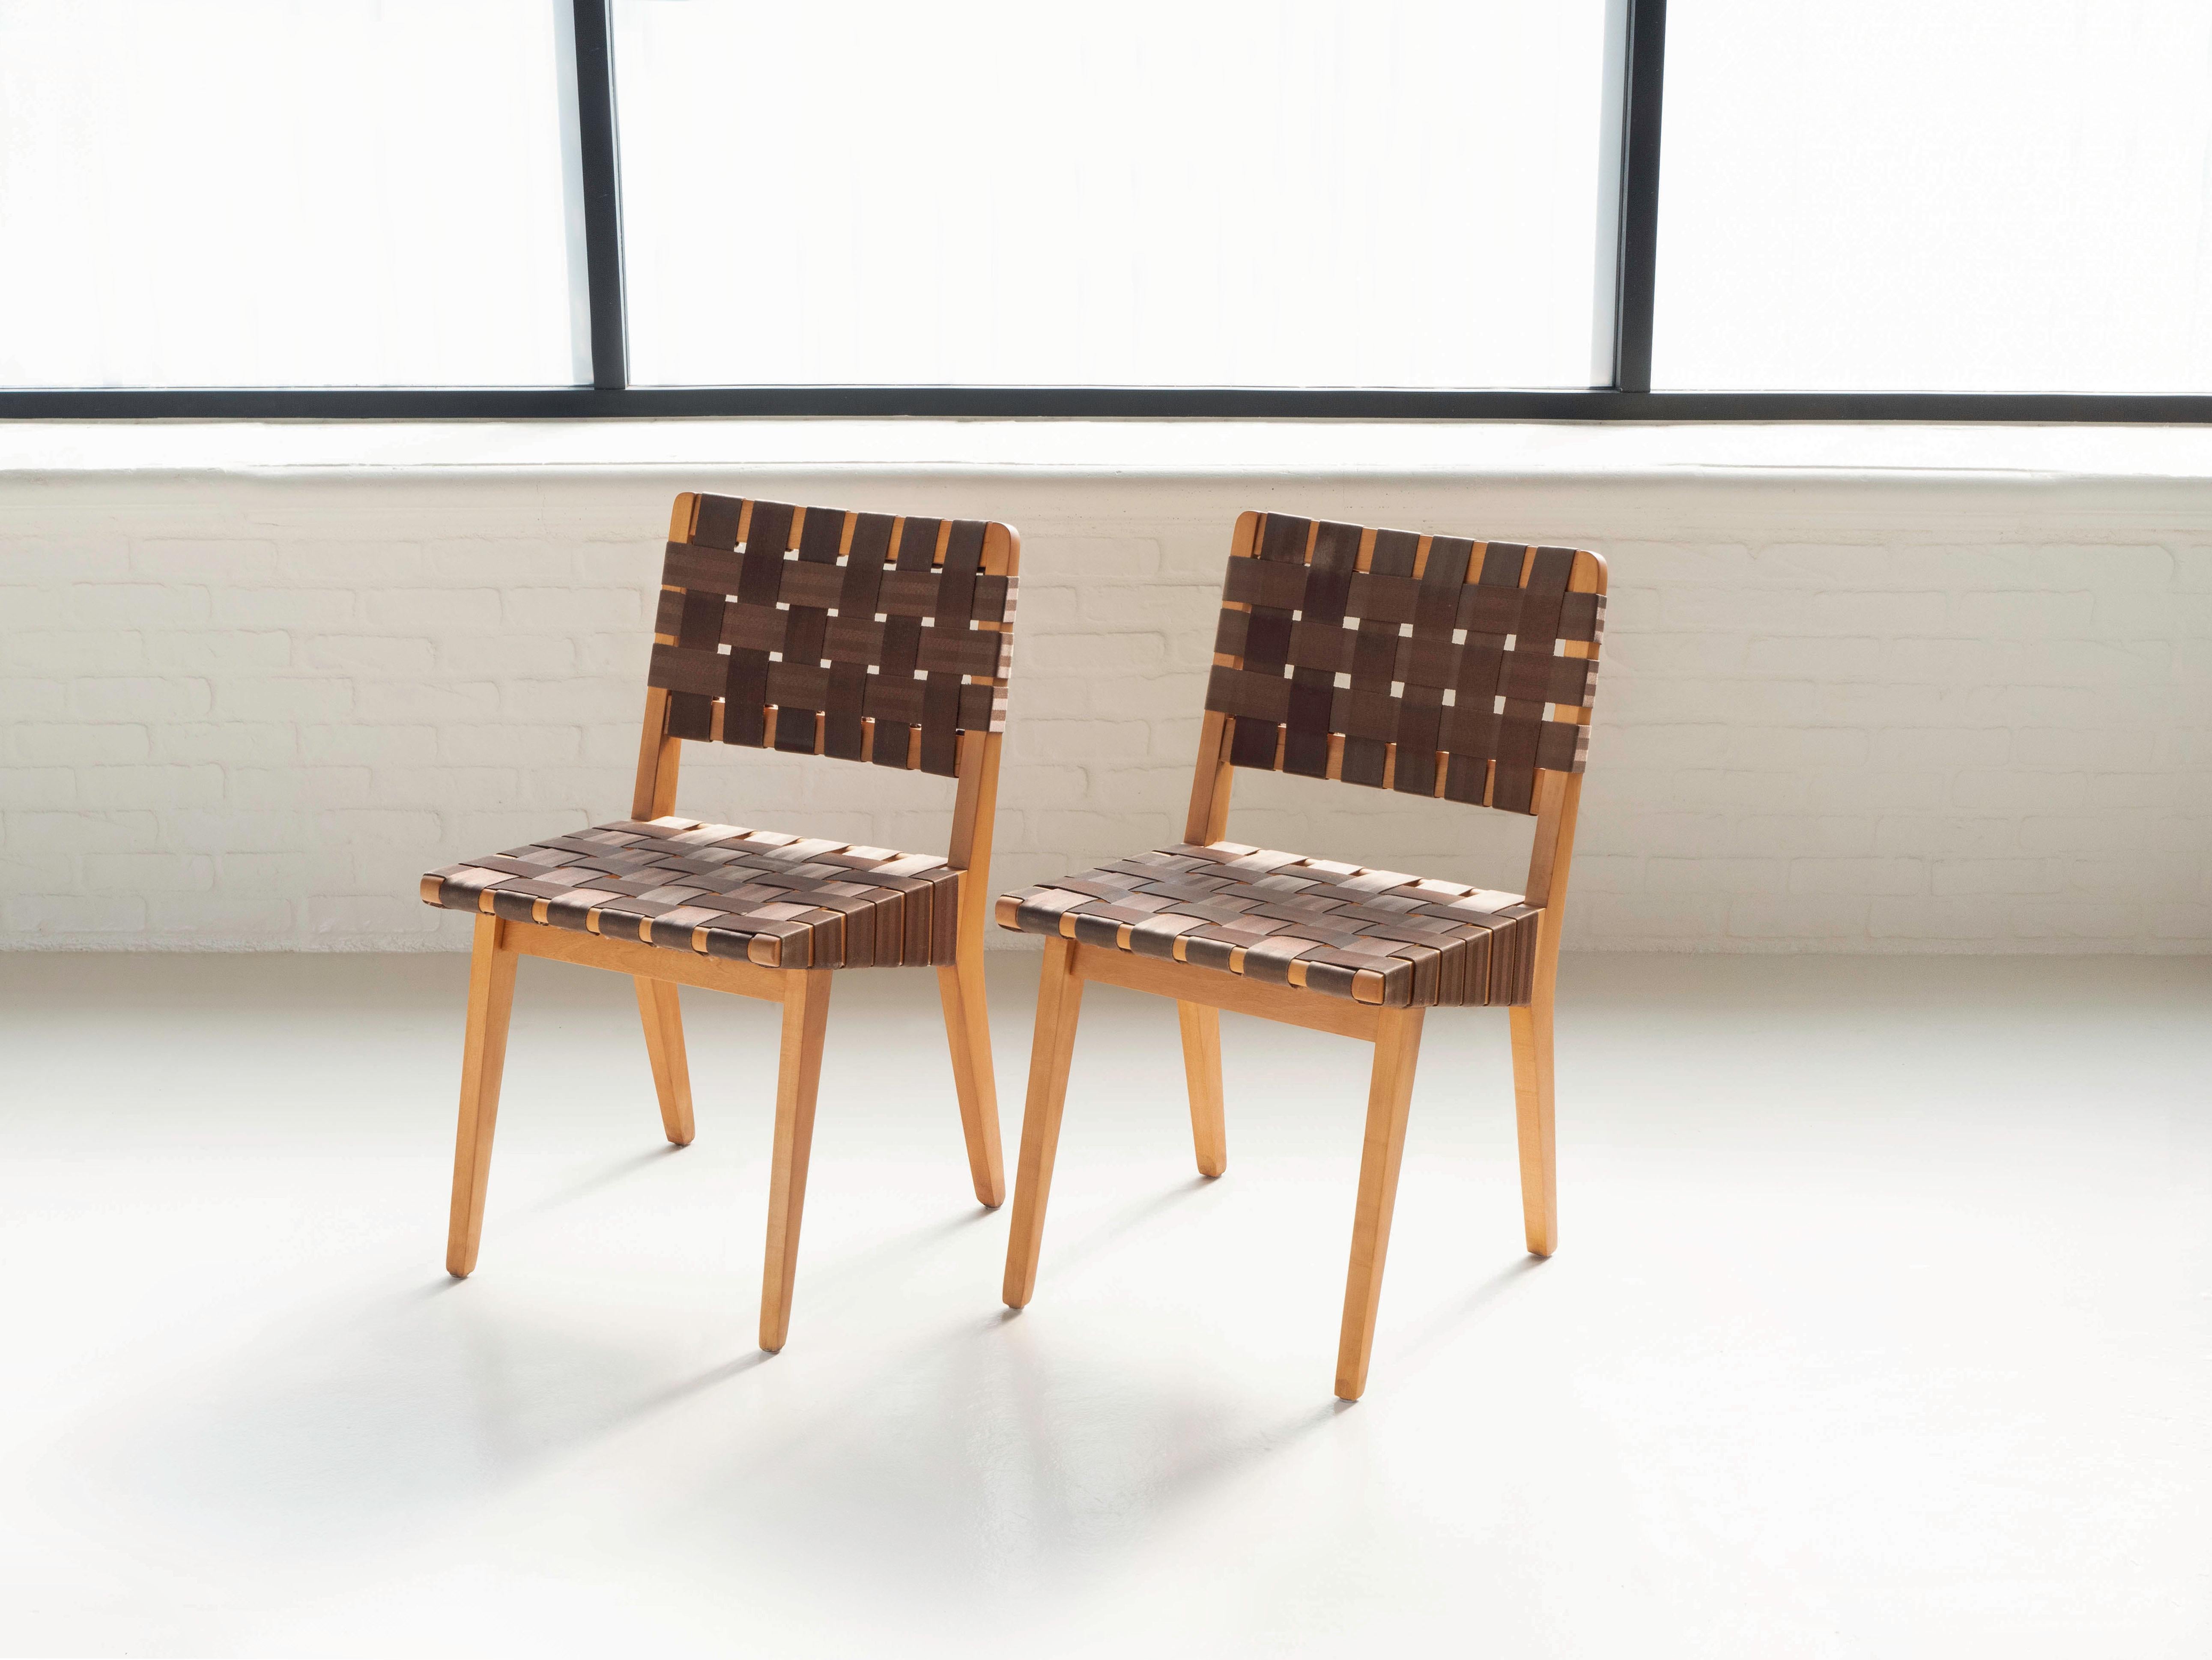 Pair of early Knoll side chairs by designer Jens Risom. Circa 1940's. 

In original condition, with wear shown throughout and near the bottom of the legs. The chairs have been lightly cleaned, the webbing is still strong and supportive. Model